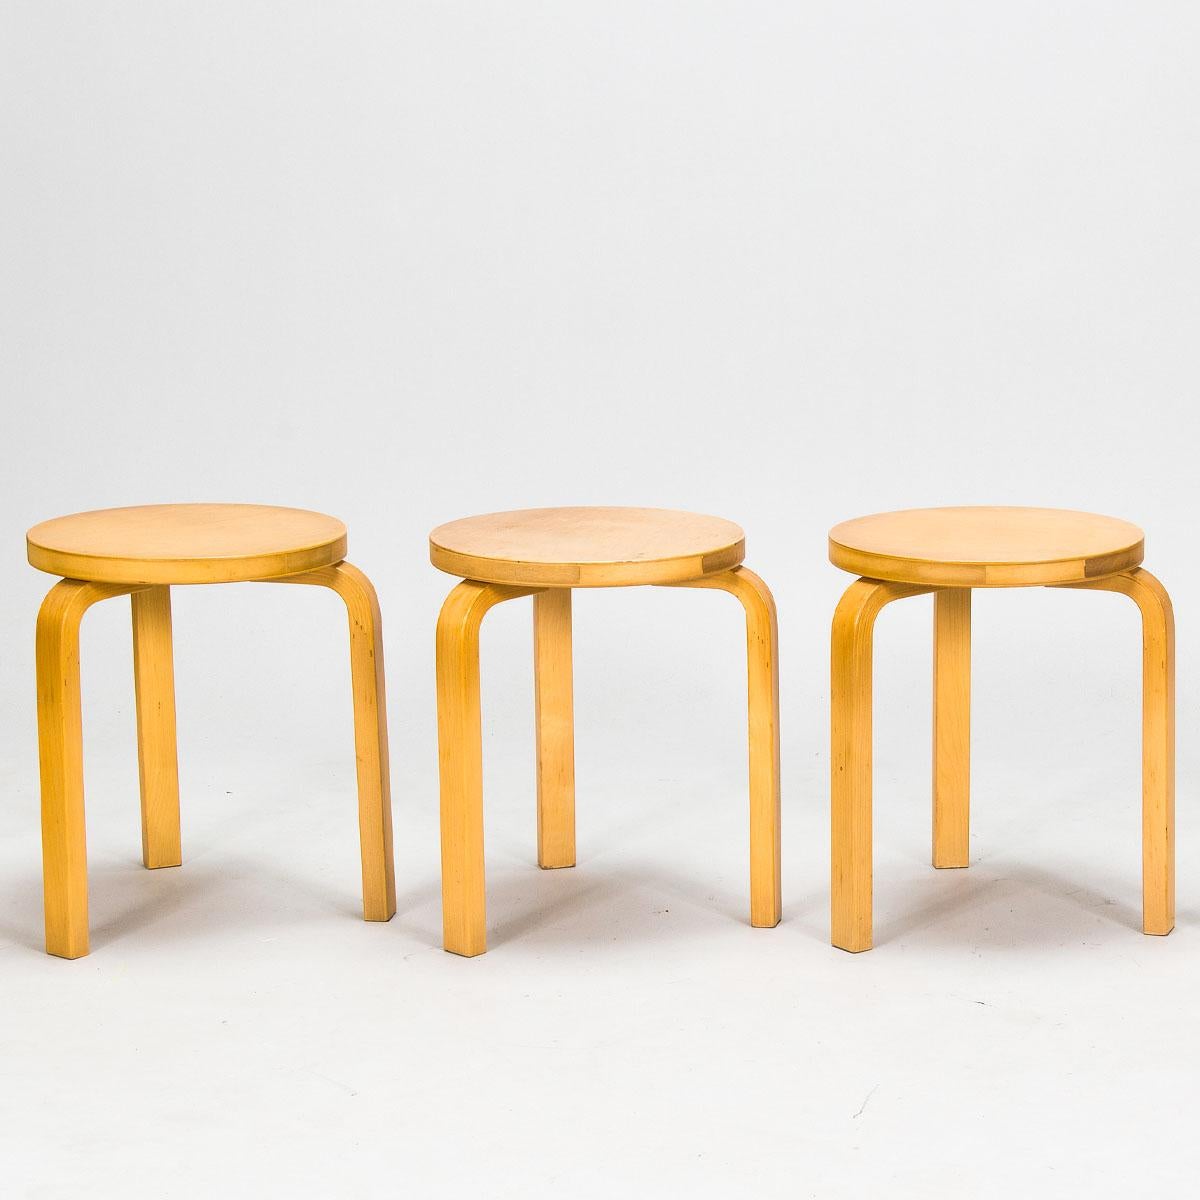 Set of 3 stackable birch stools model 60 designed by Alvar Aalto and manufactured by Artek in Finland, 1990s.

Date of manufacture: 1990s
Origin: Finland
Material: birch
Dimensions: H 44 cm x W 35 cm x D 35 cm
Condition: in very good original